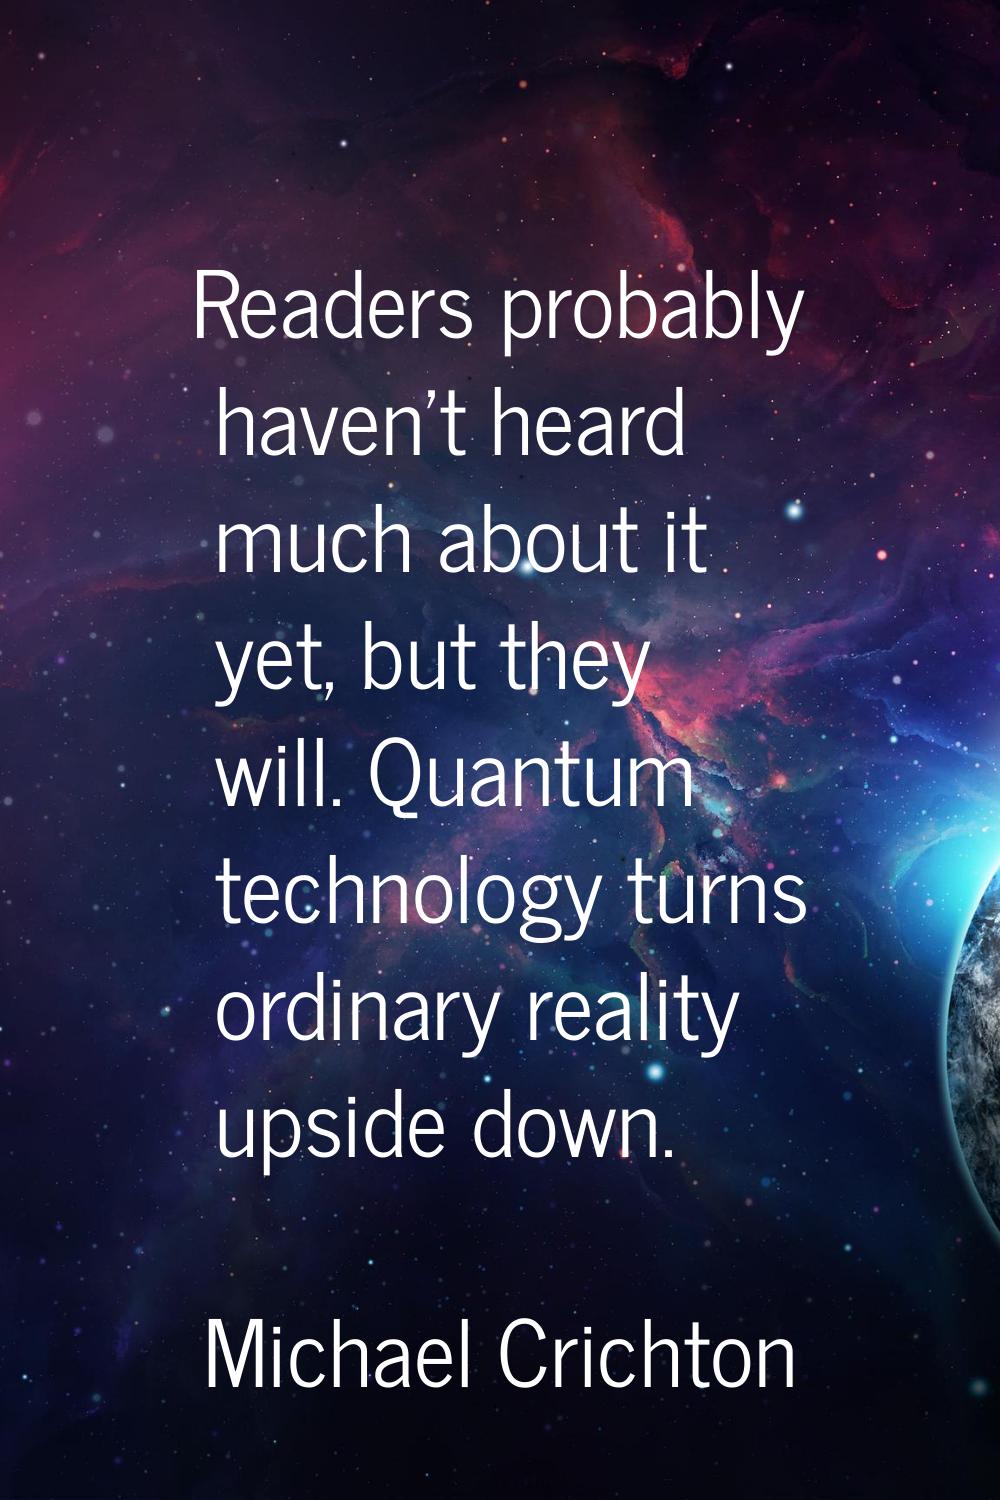 Readers probably haven't heard much about it yet, but they will. Quantum technology turns ordinary 